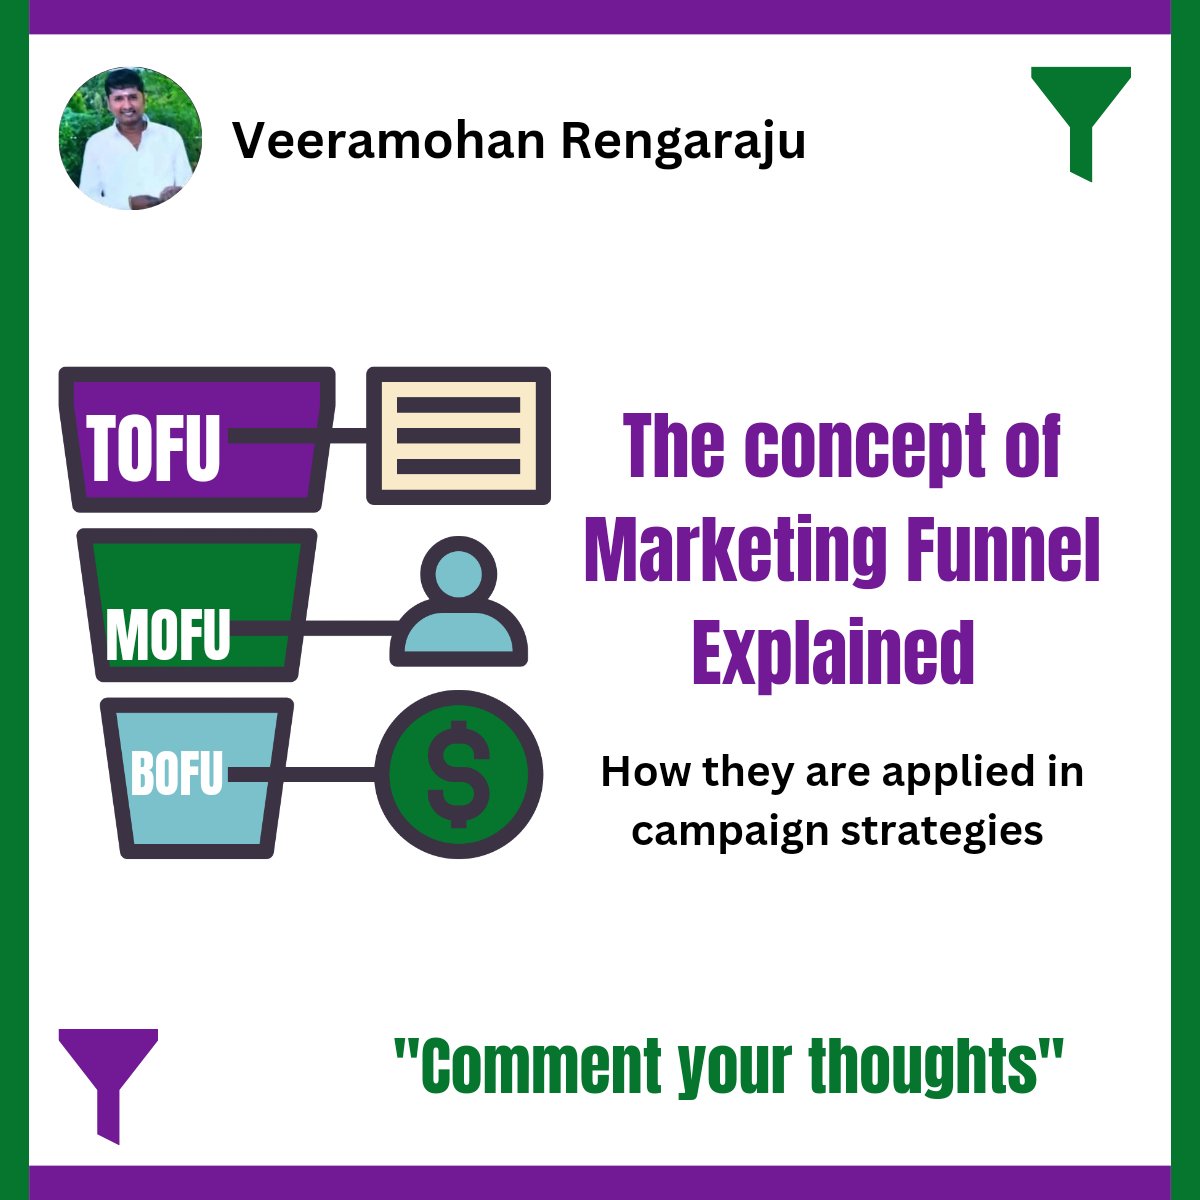 🌟 Marketing Funnels Explained! 🚀 ( TOFU, MOFU, BOFU ) in Campaign Strategies!

Here's a breakdown of each stage and how they are applied in campaign strategies: